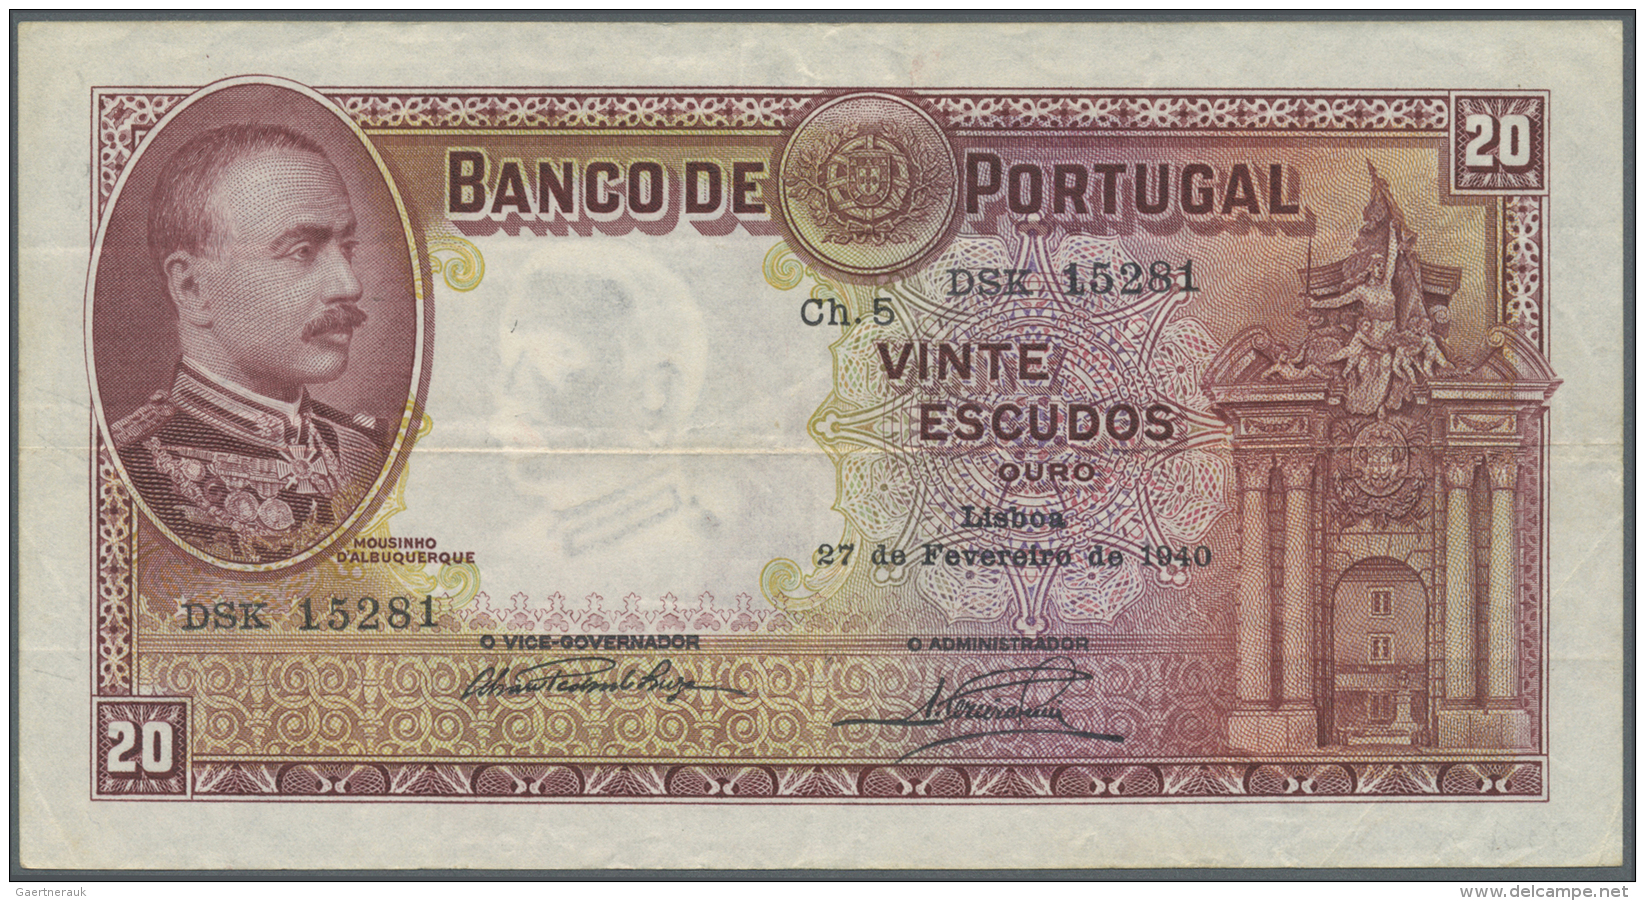 Portugal: 20 Escudos 1940 P. 143, Used With Folds In Paper But No Holes Or Tears, Paper Very Crisp And Colors Original, - Portogallo